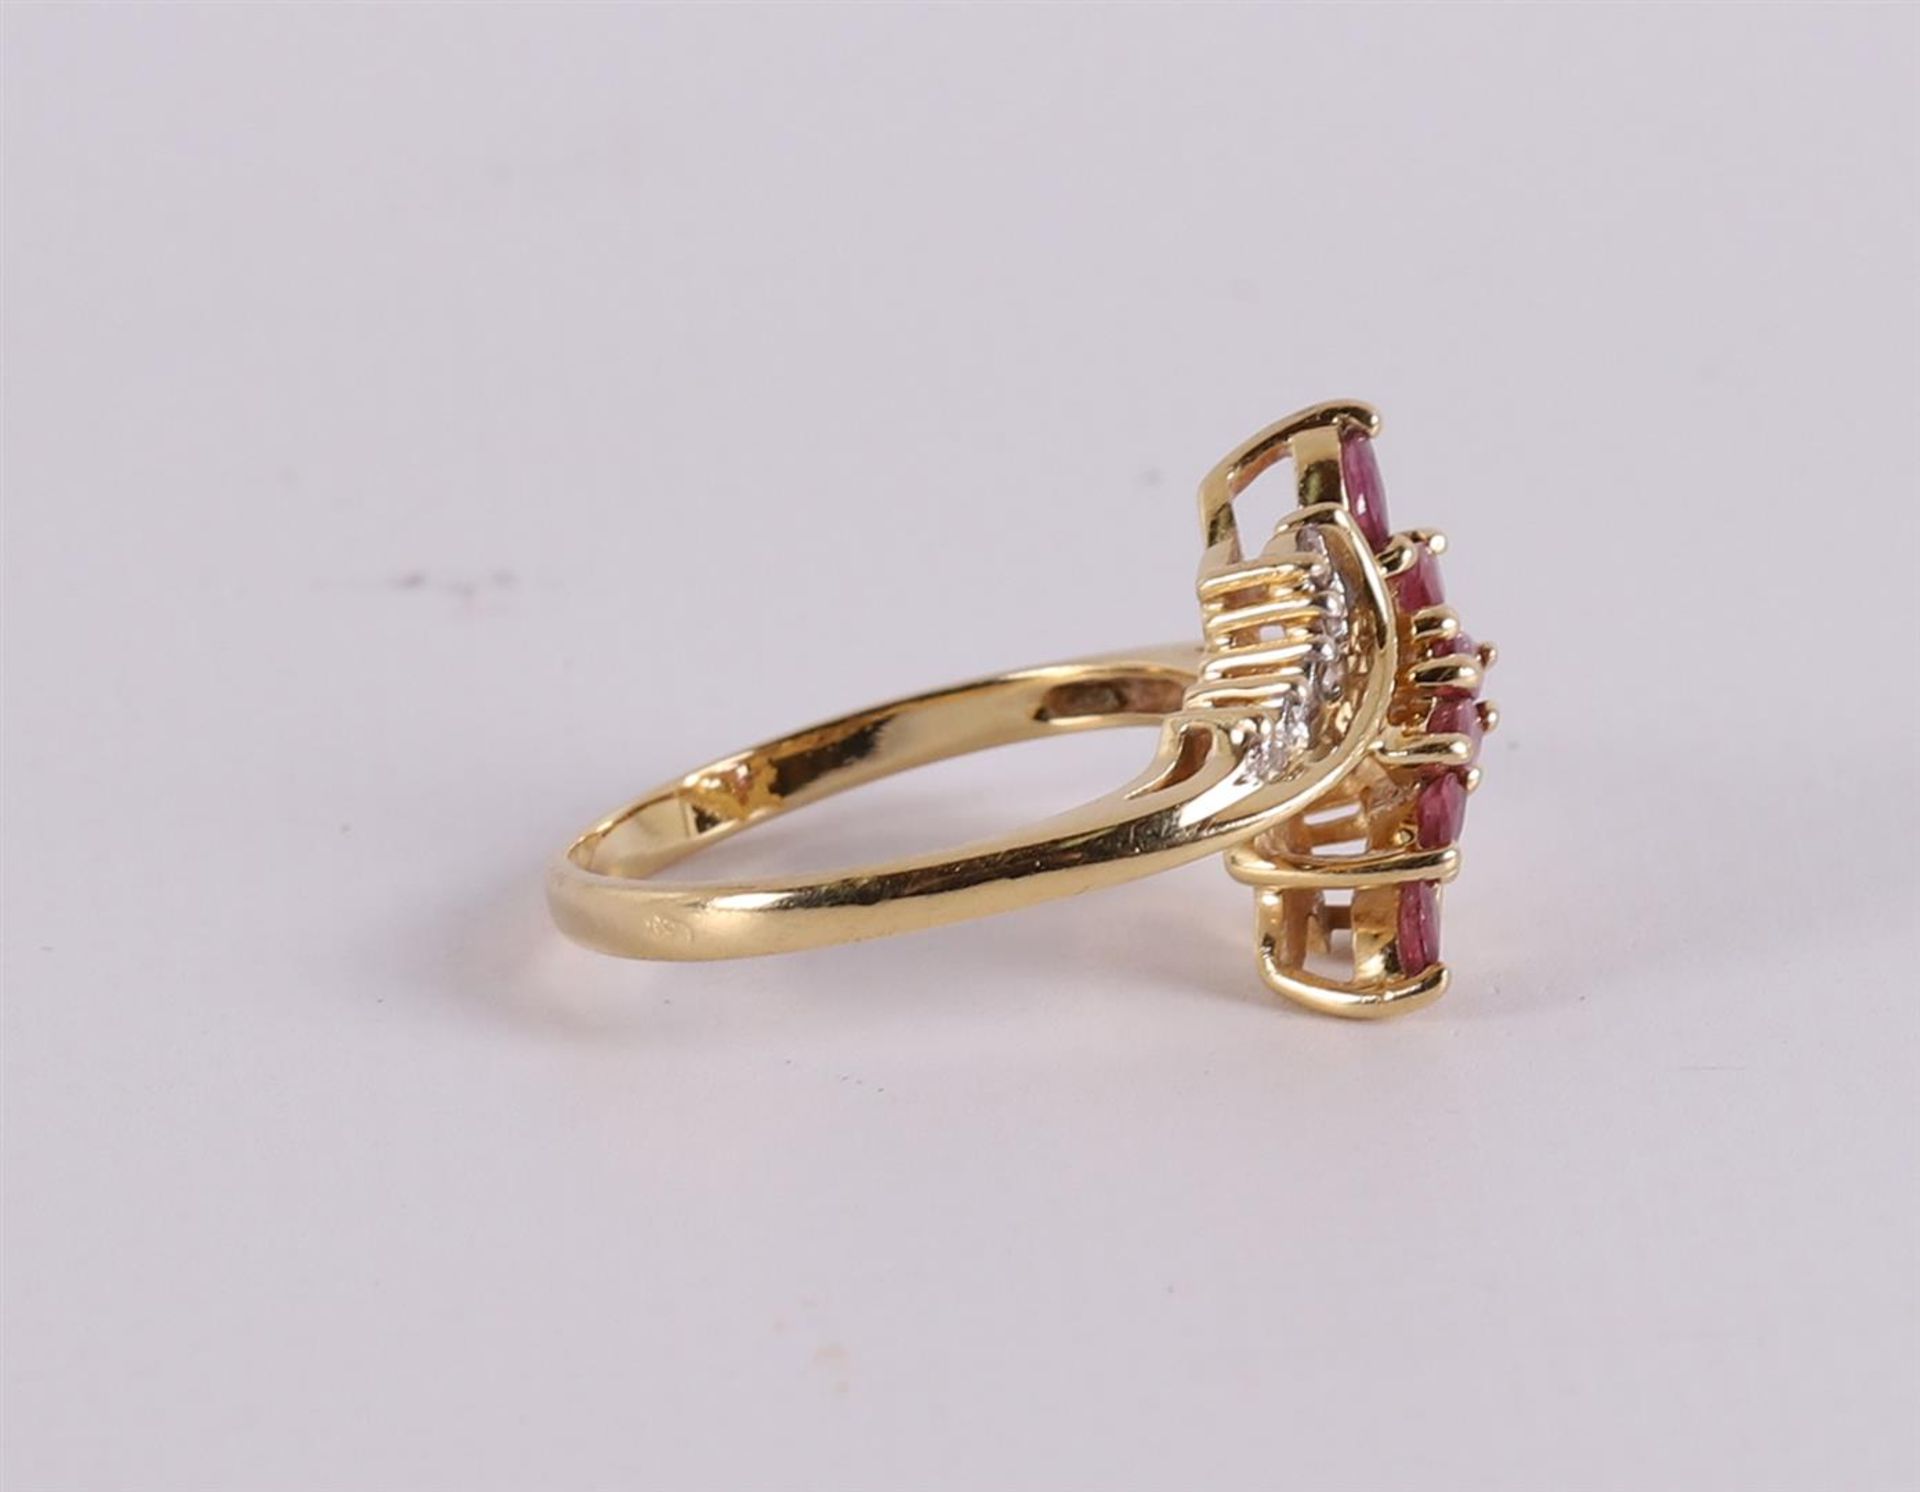 An 18 kt gold fantasy ring with 6 marquise cut rubies - Bild 3 aus 3